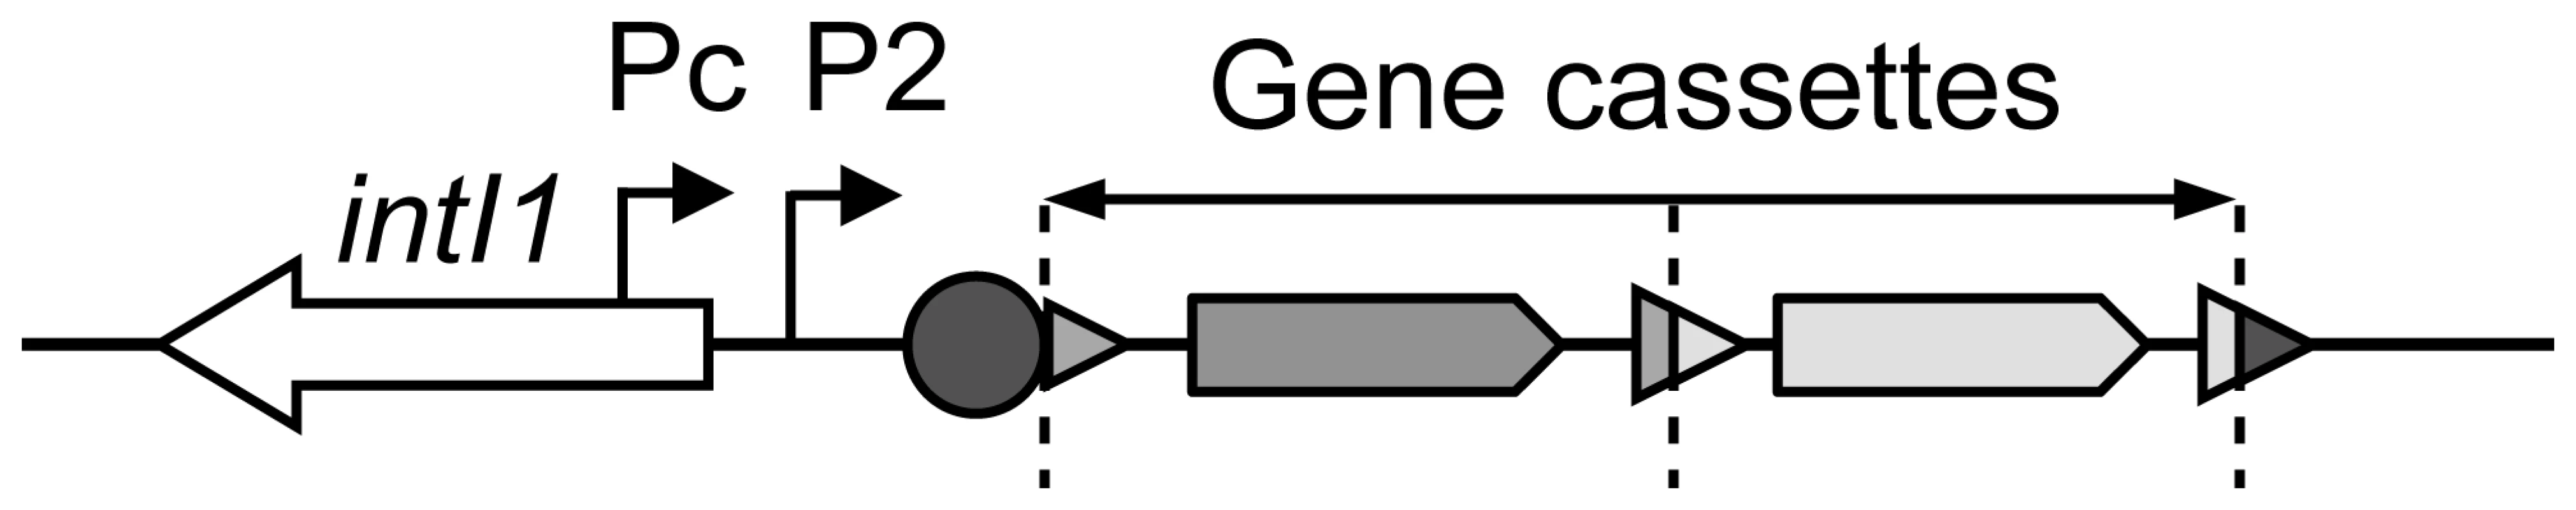 General structure of a class 1 integron.